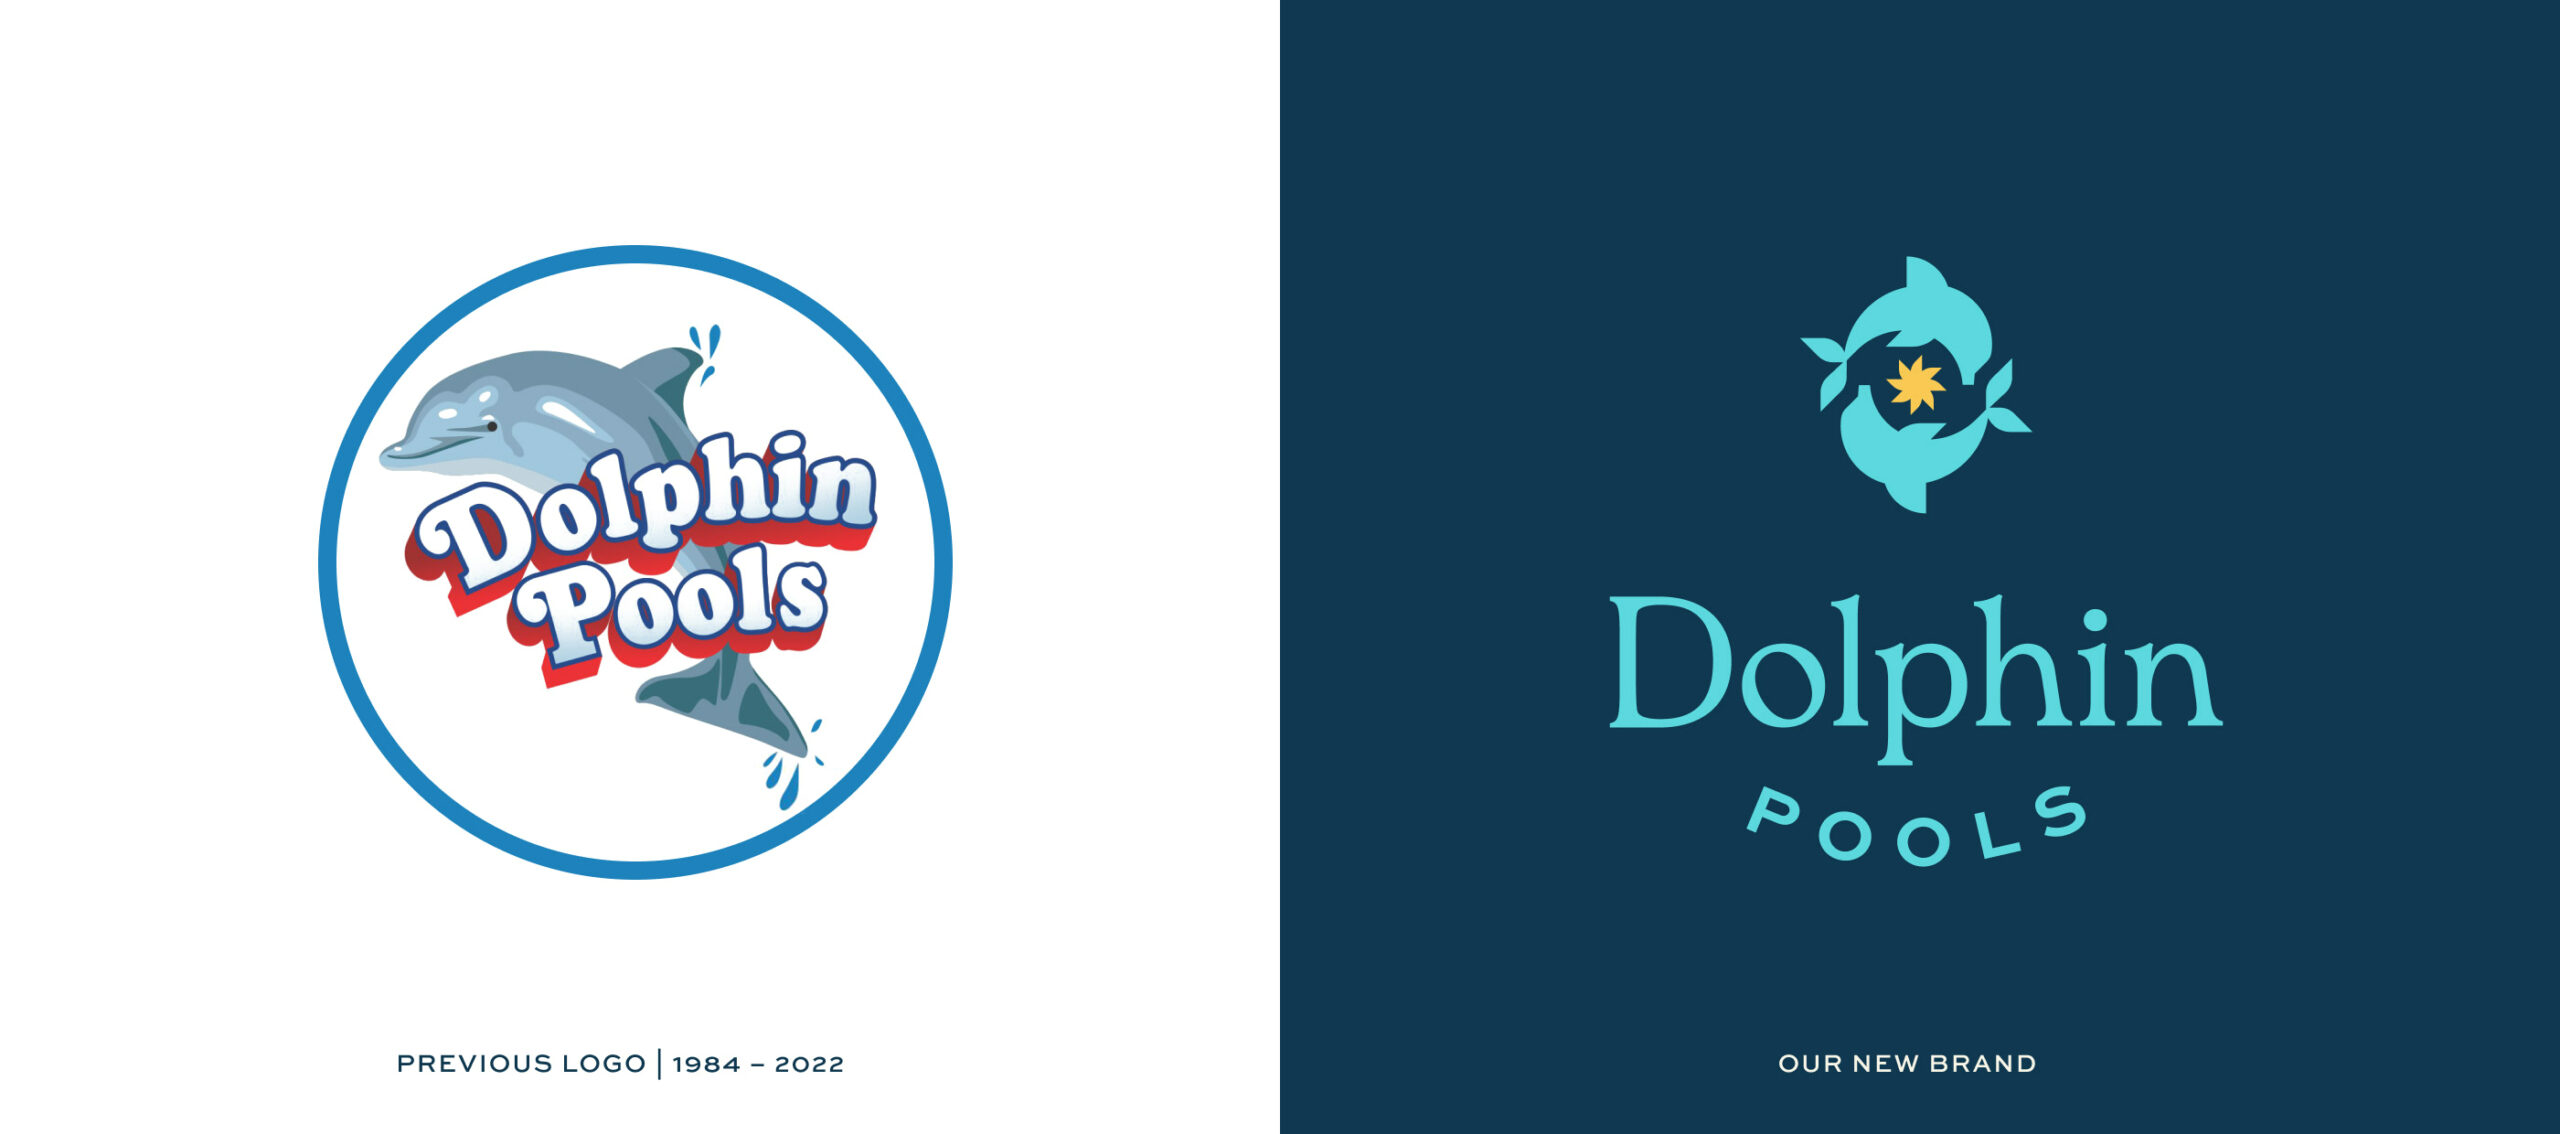 Animation of old Dolphin Pools logo turning into the new Dolphin Pools logo